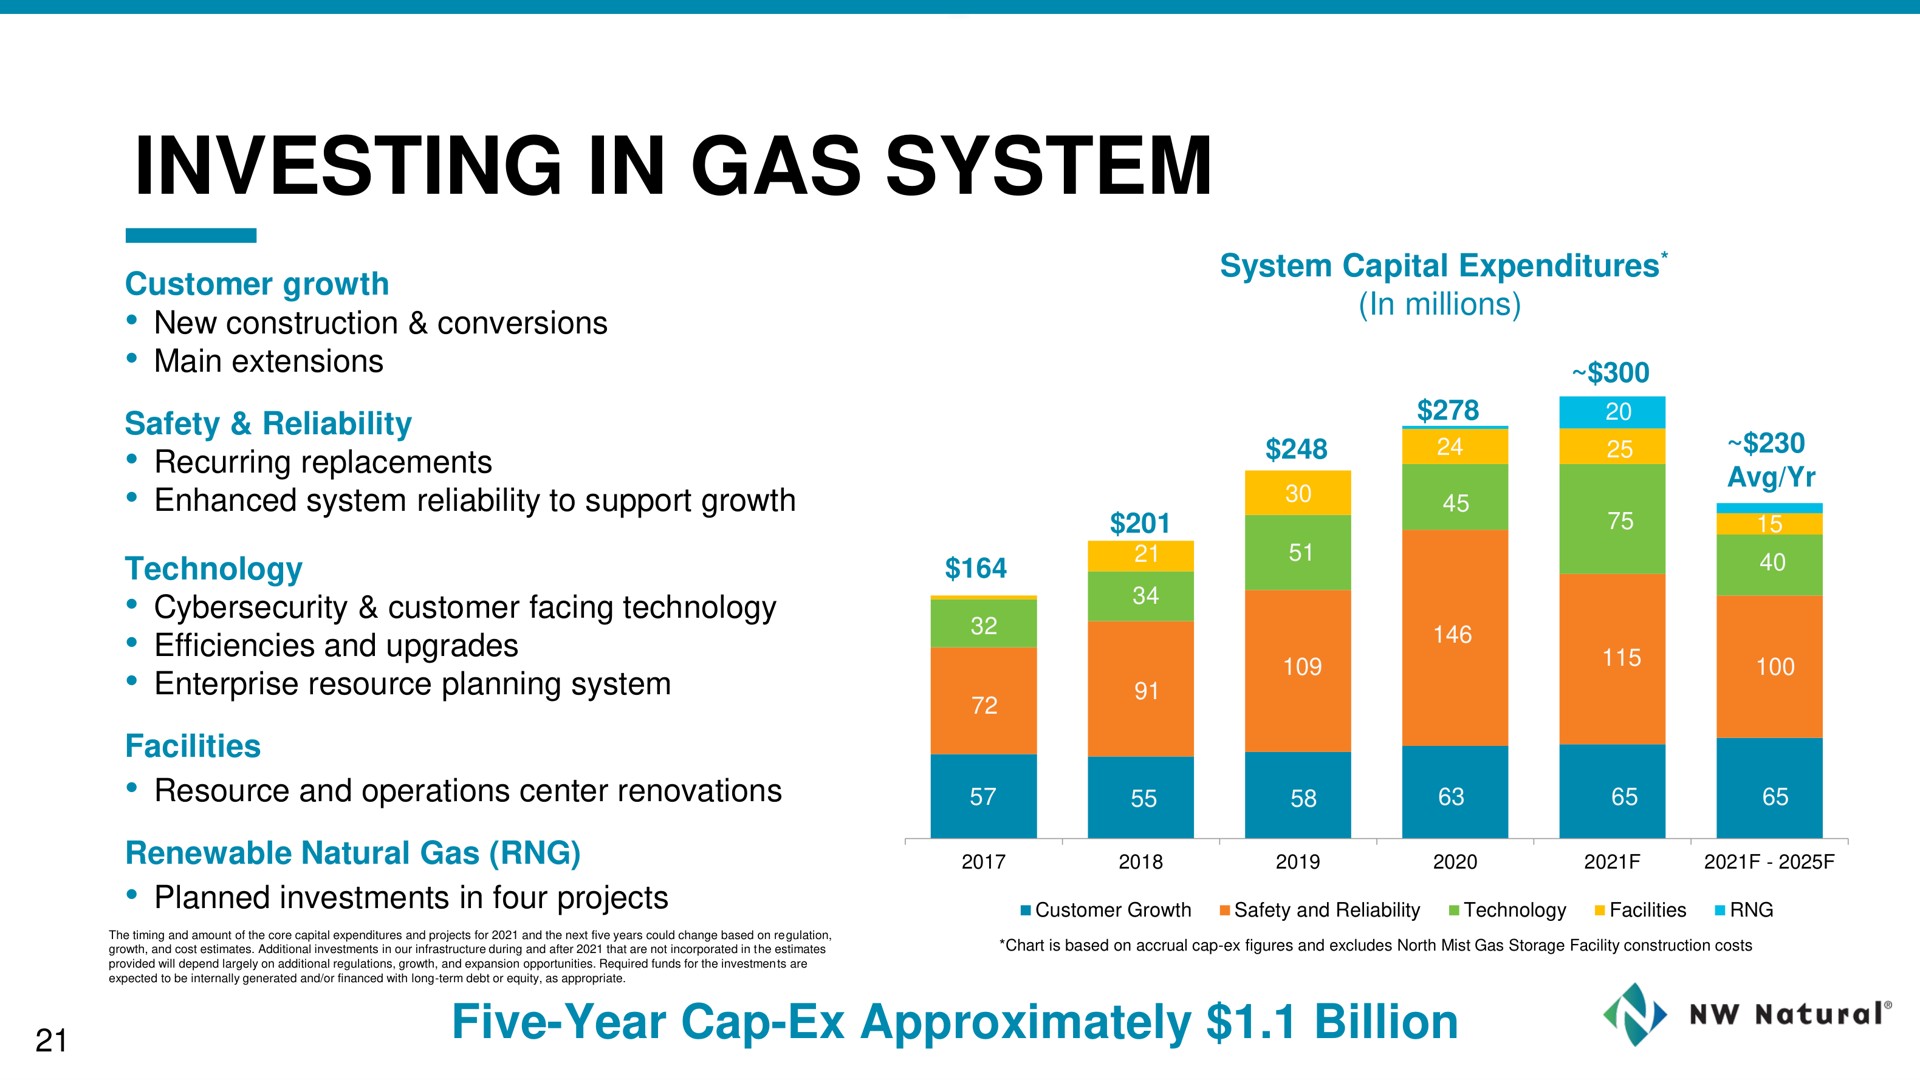 investing in gas system | NW Natural Holdings